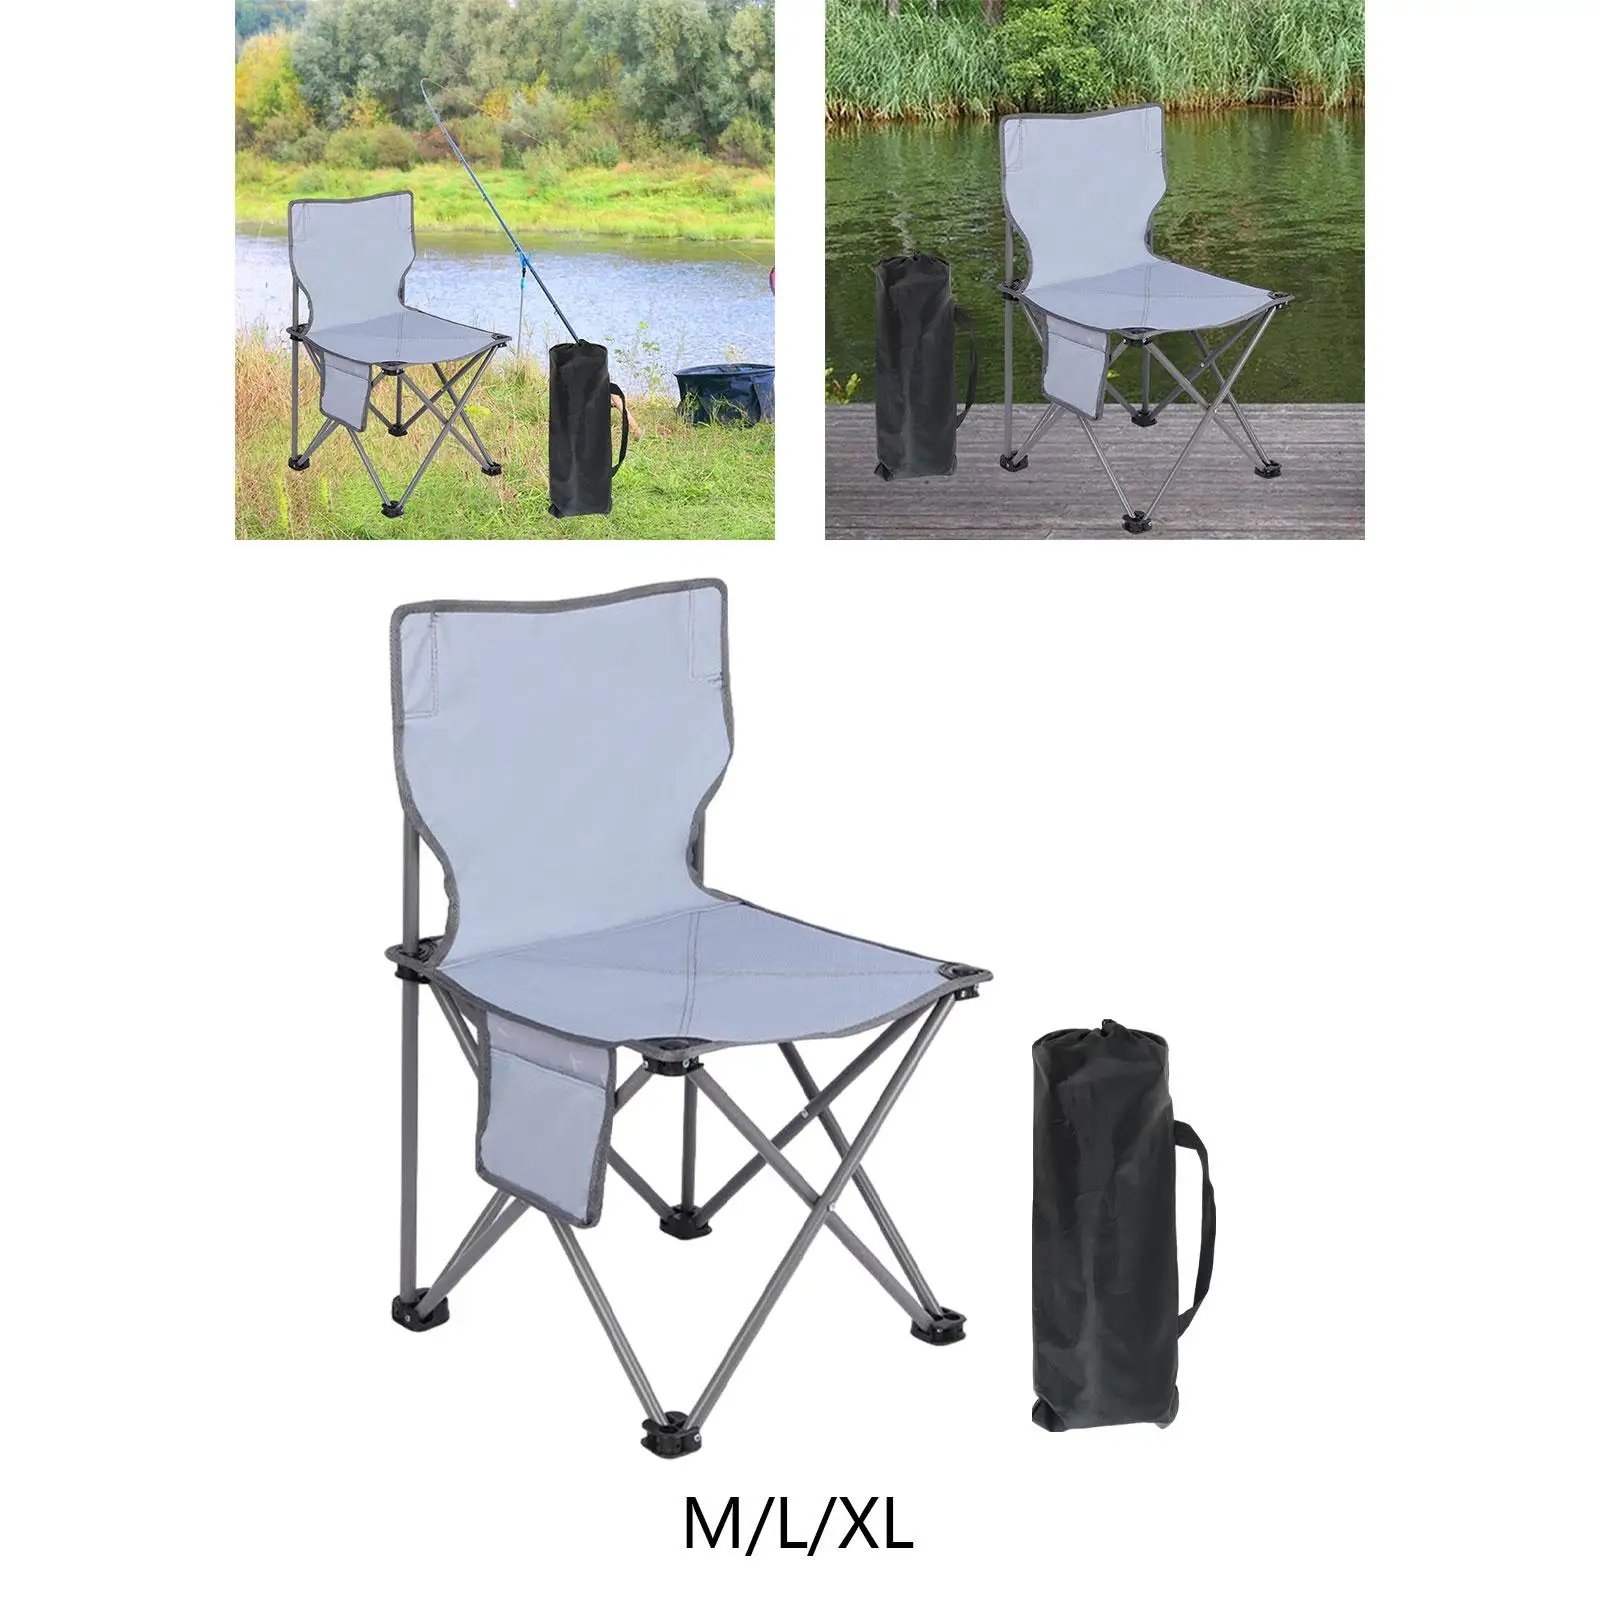 Portable Camping Chair High Back Lightweight for Heavy People Fishing Chair Folding Chair for Patio Lawn Picnic Concert Hiking